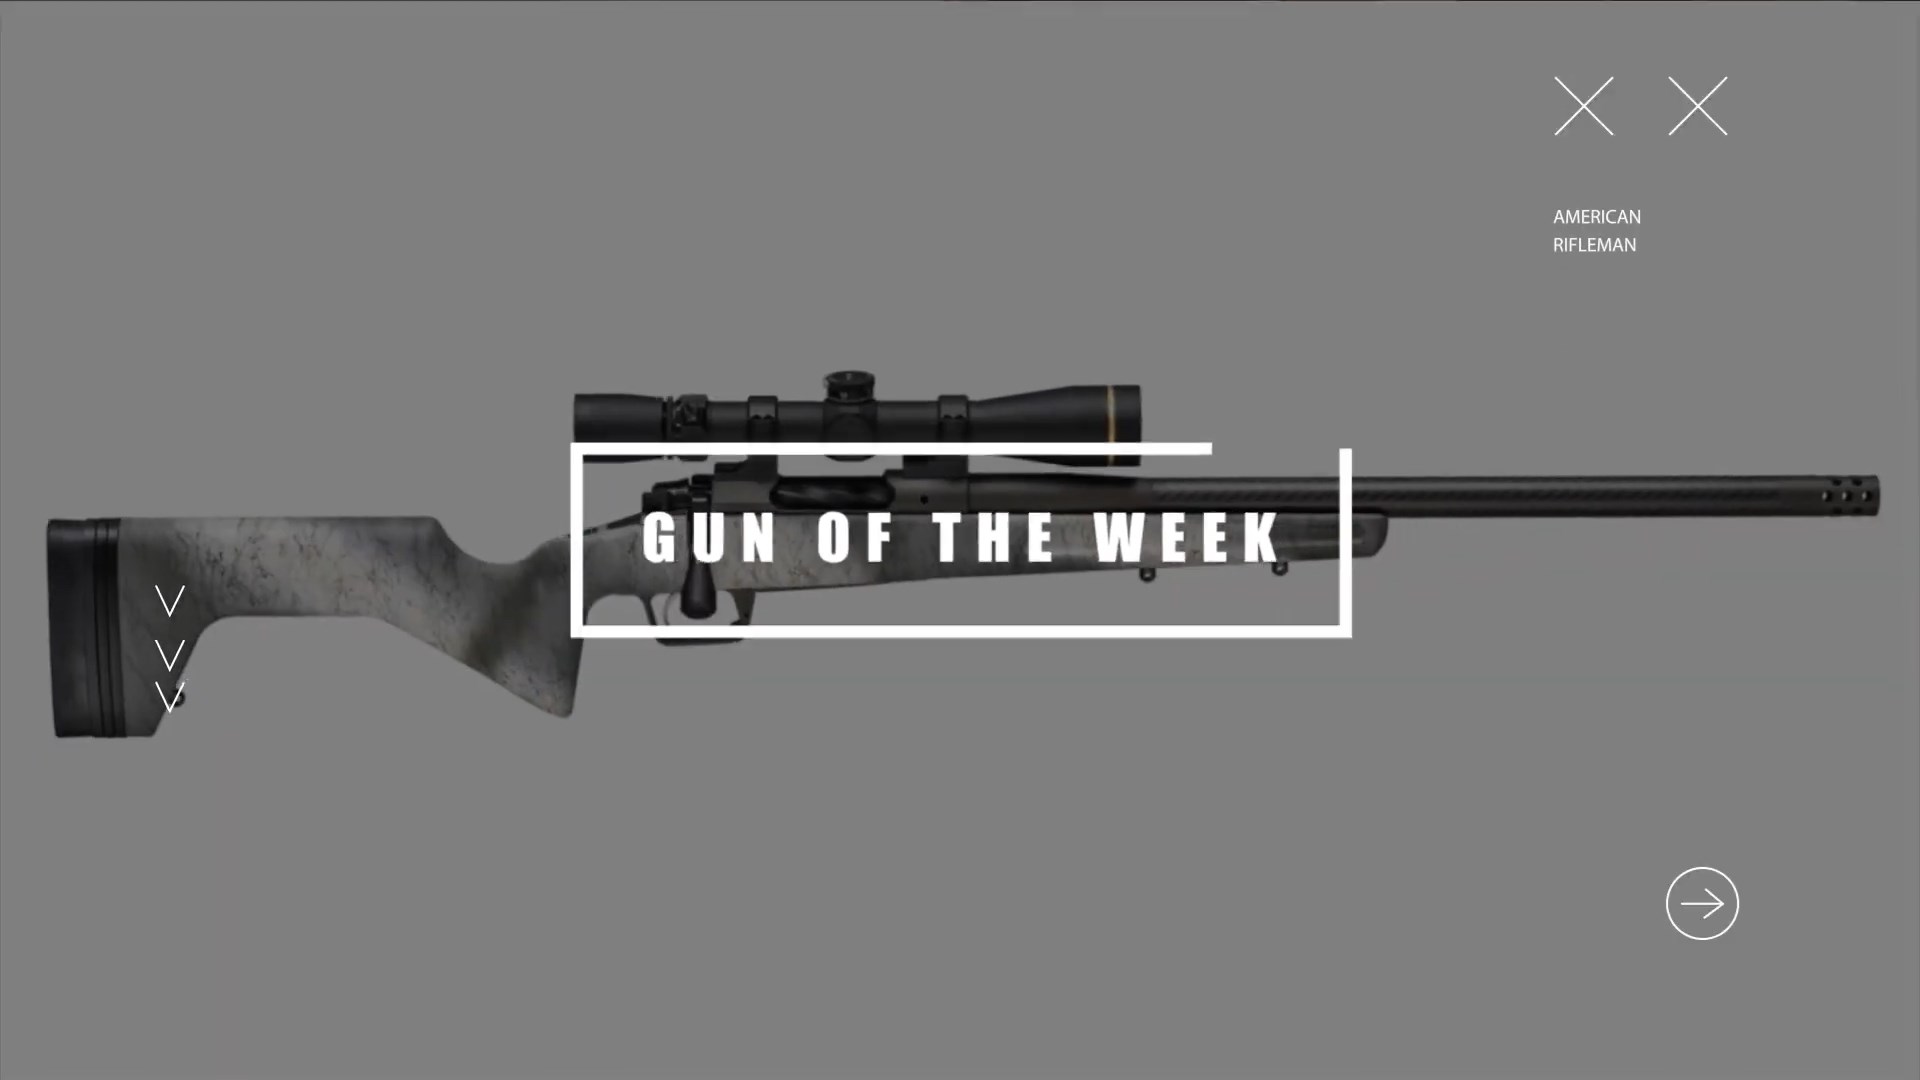 GUN OF THE WEEK text box overlay bolt-action springfield armory model 2020 redline hunting rifle soft focus background words on image AMERICAN RIFLEMAN arrow circles X